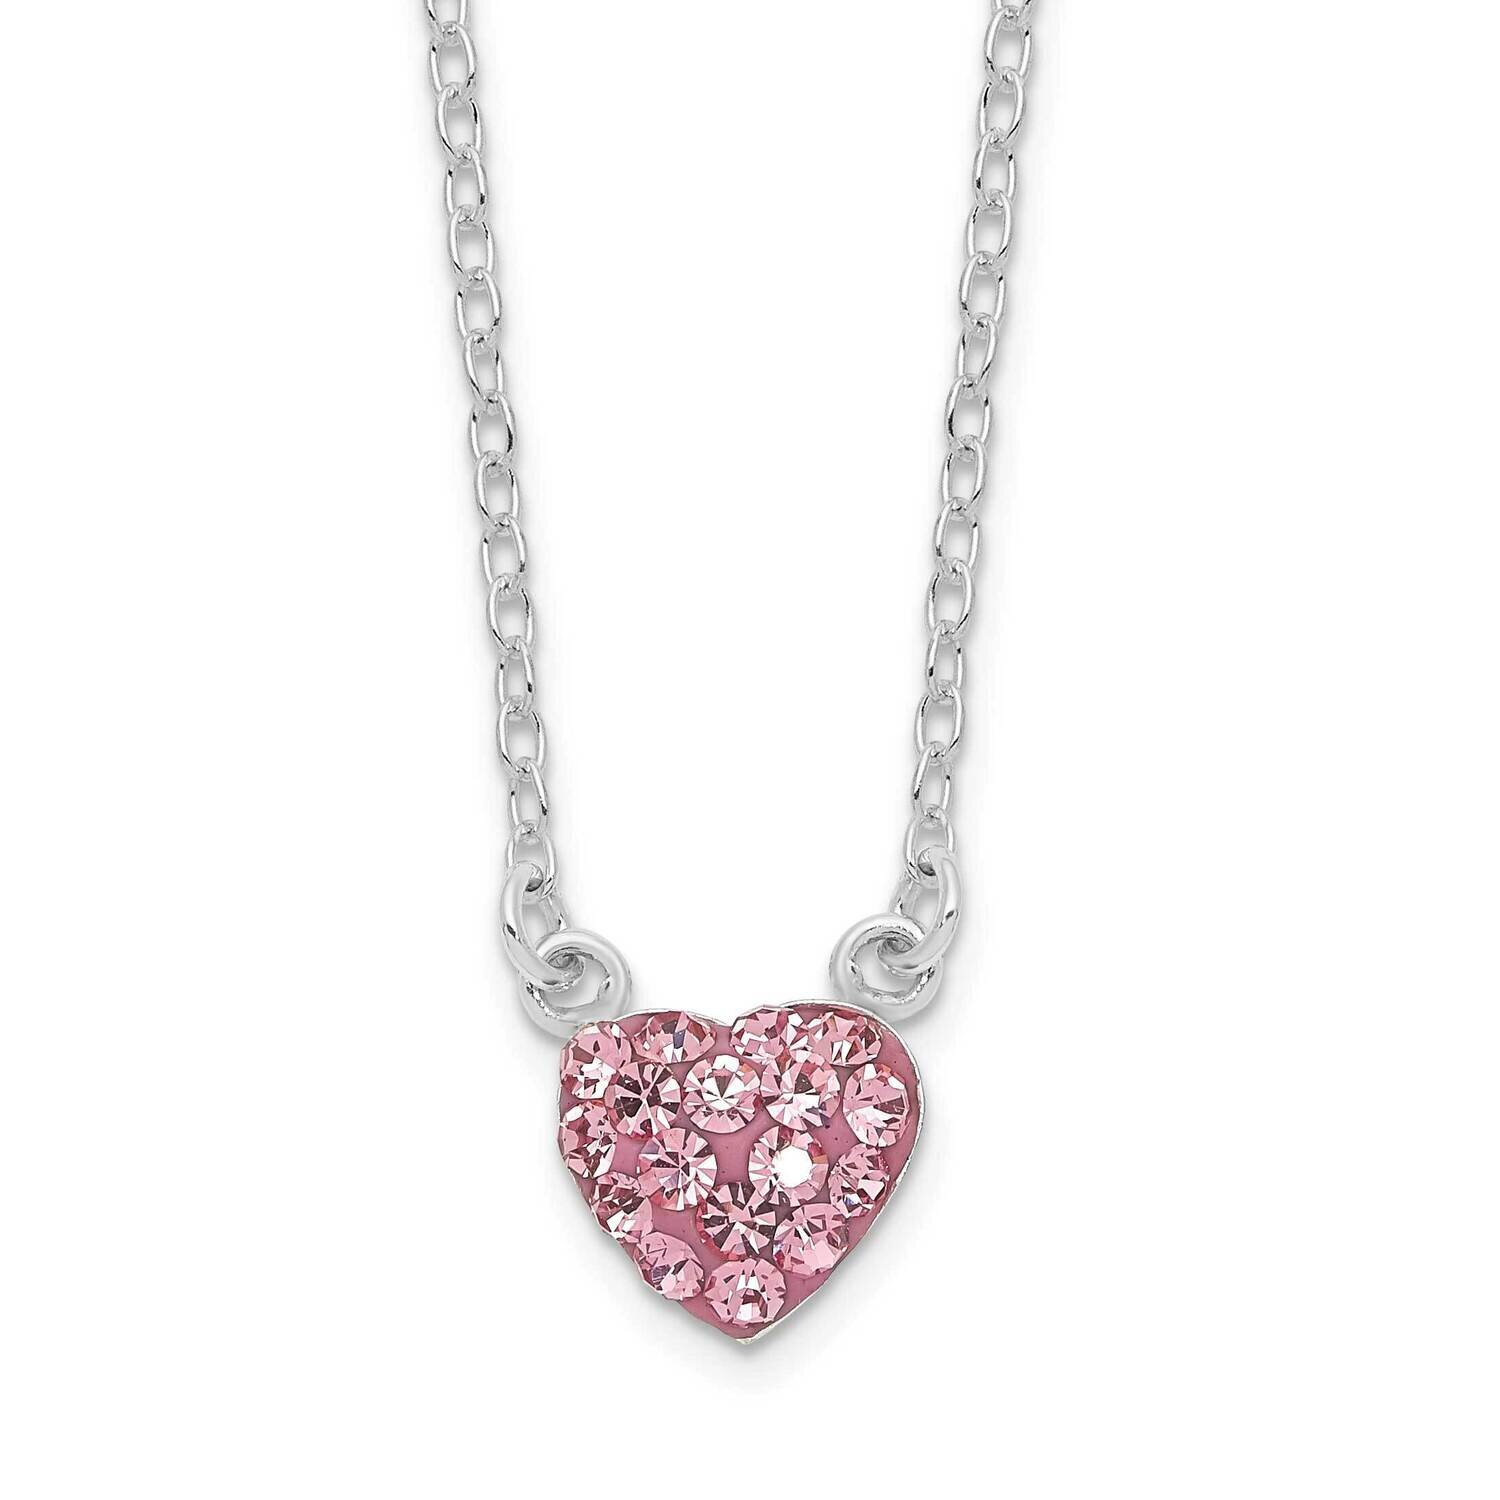 Pink Crystal Heart Necklace 18.25 Inch Sterling Silver Rhodium-Plated Polished QG6078-18.25